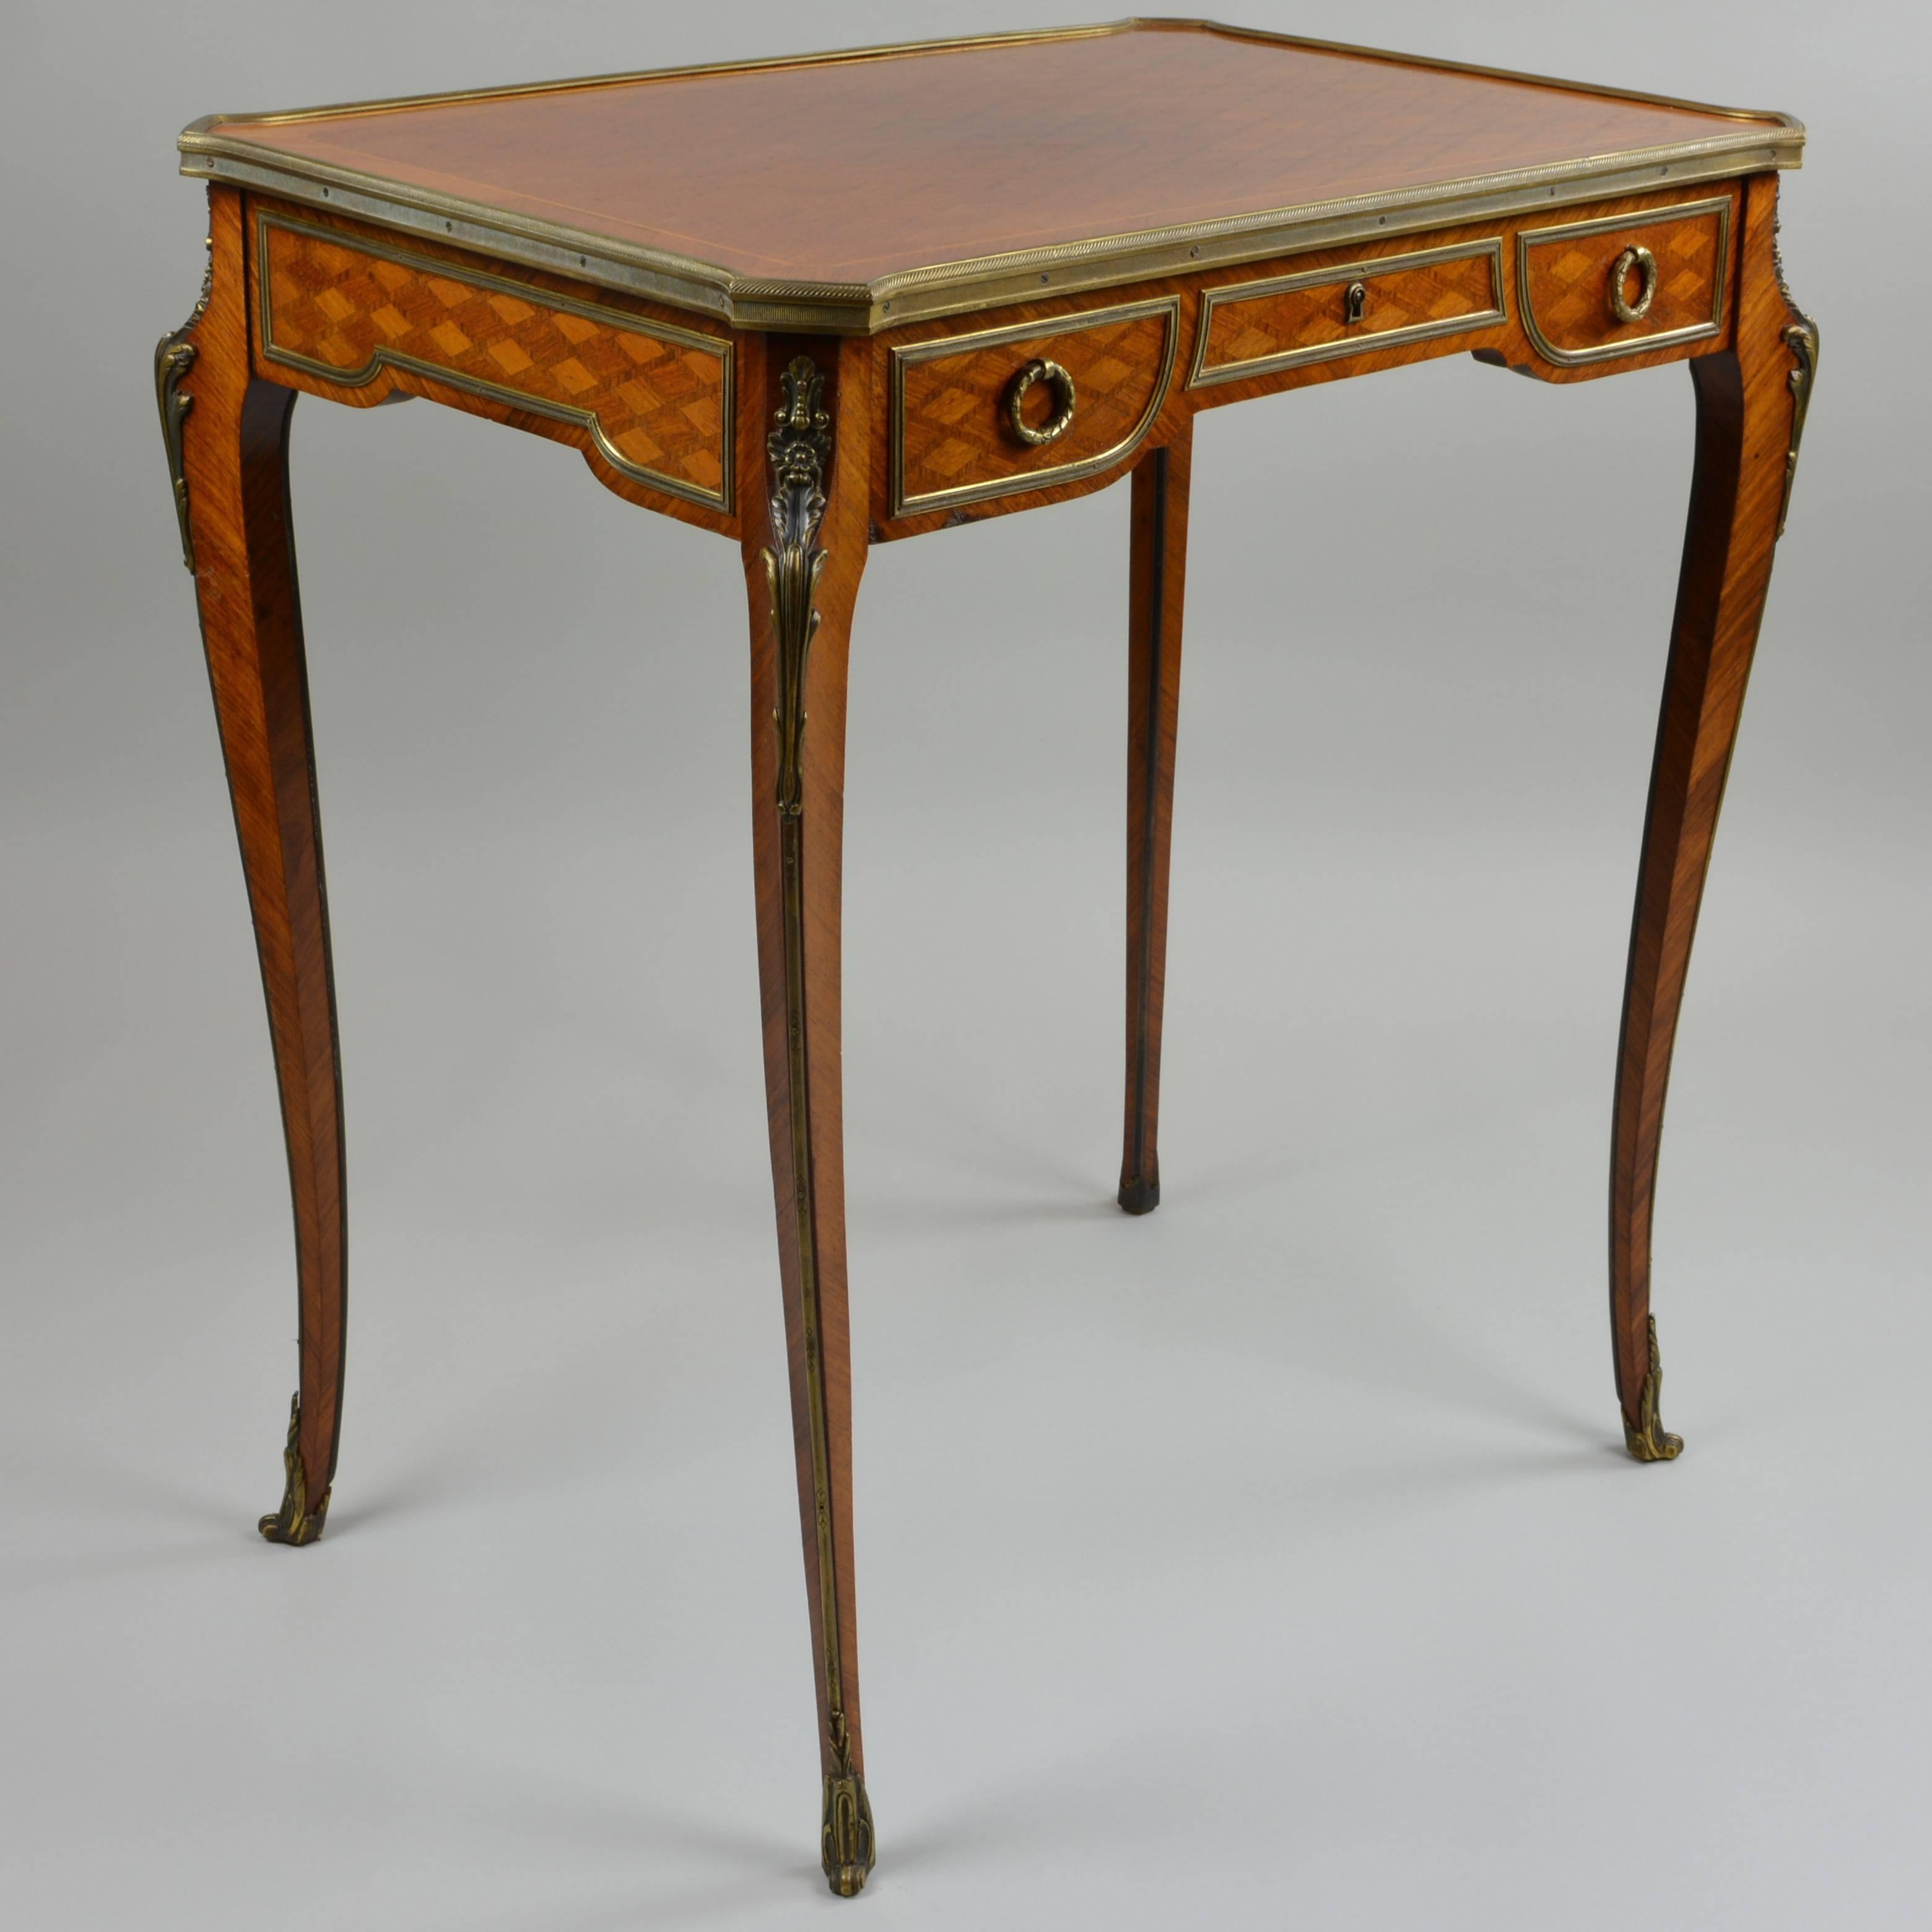 Mid-19th Century 19th Century Gilt Bronze-Mounted Kingwood Tulipwood Inlaid Occasional Table For Sale